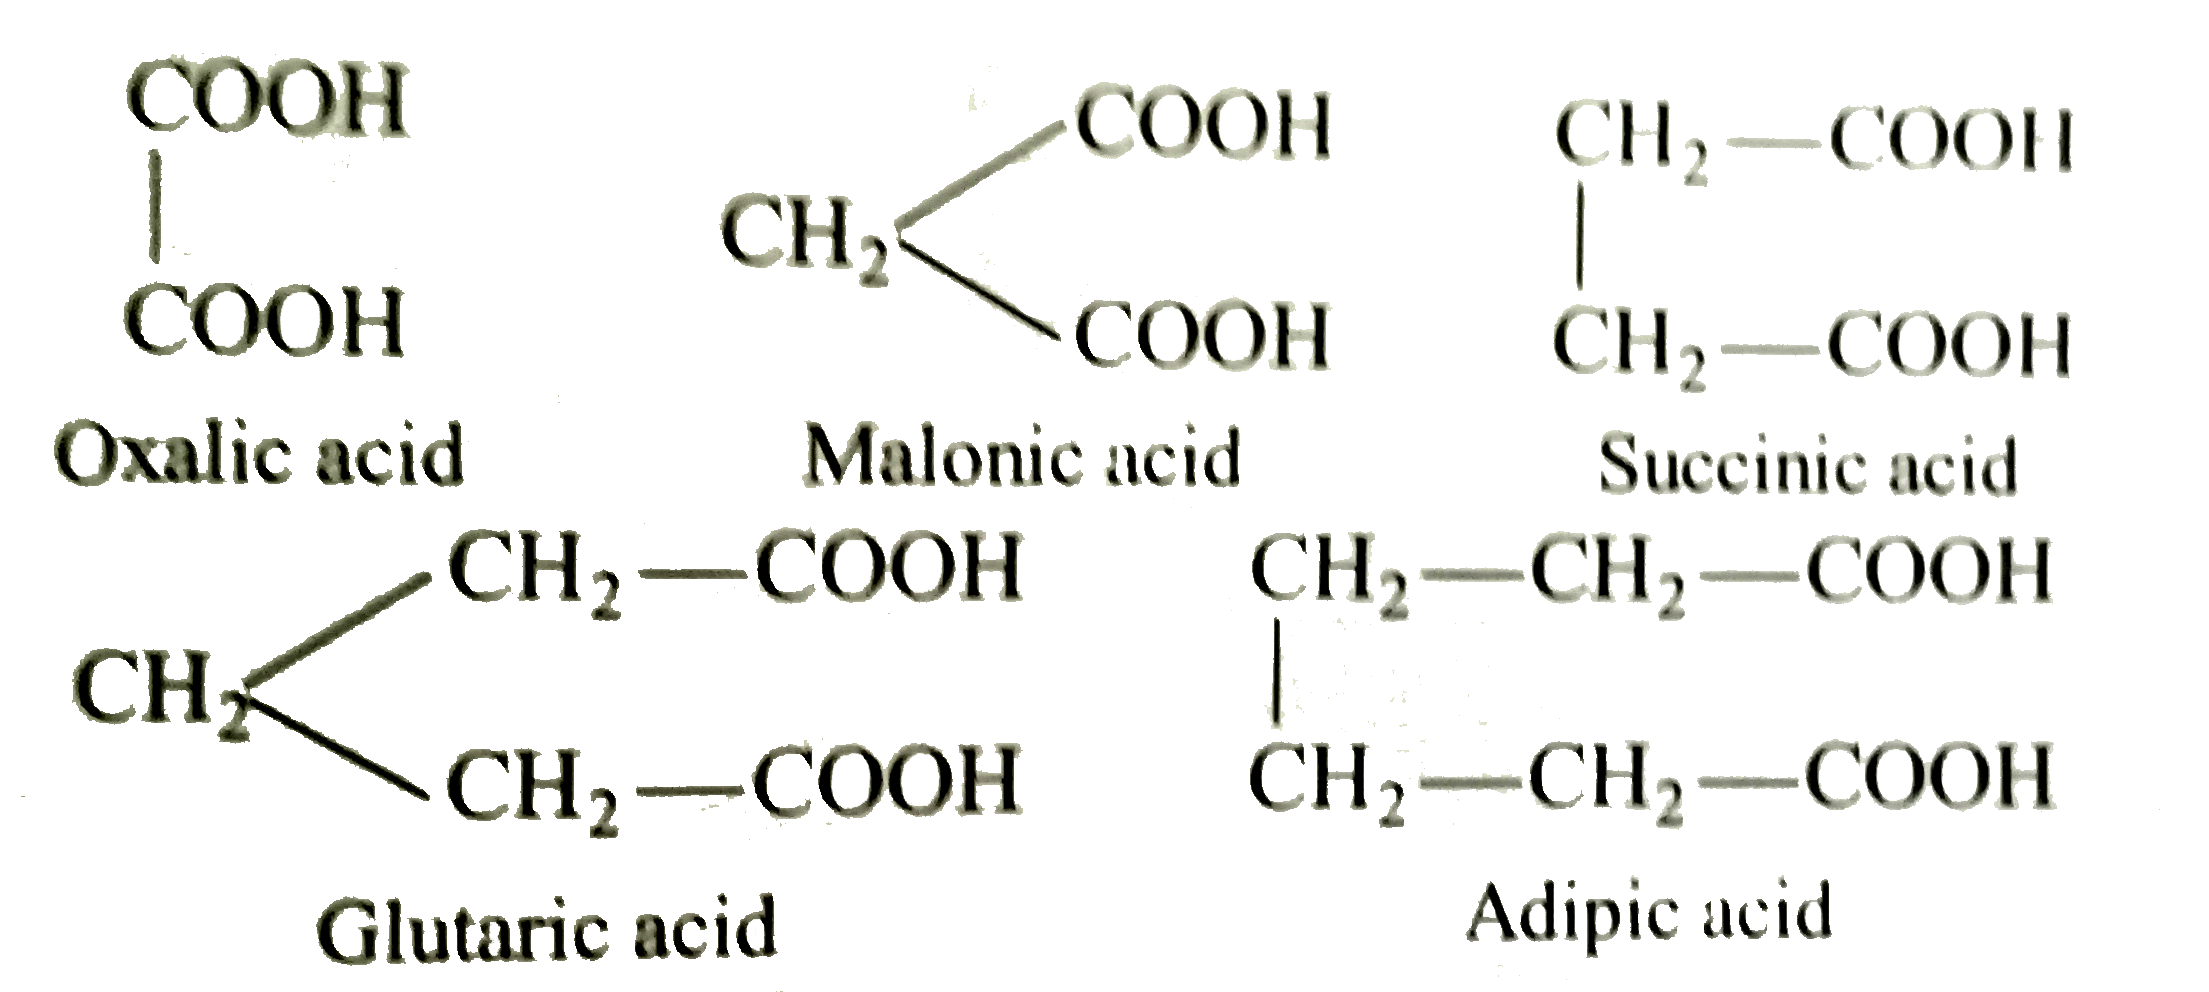 Dicarboxylic acids have two carboxylic groups, e.g.,      Acidity of dicarboxylic acid depends upon the stability of intermediate ion and upon the distance between two carboxylic groups. Shorter the distance between two carboxylic groups, greater is the acidic character. Melting point of these acids depends on the symmetry. Greater the symmetry, higher will be the melting point.   Dicarboxylic acids on heating give monocarboxylic acid allkanes, cyclic ketones depending on the conditions   Which of the following has highest melting point?